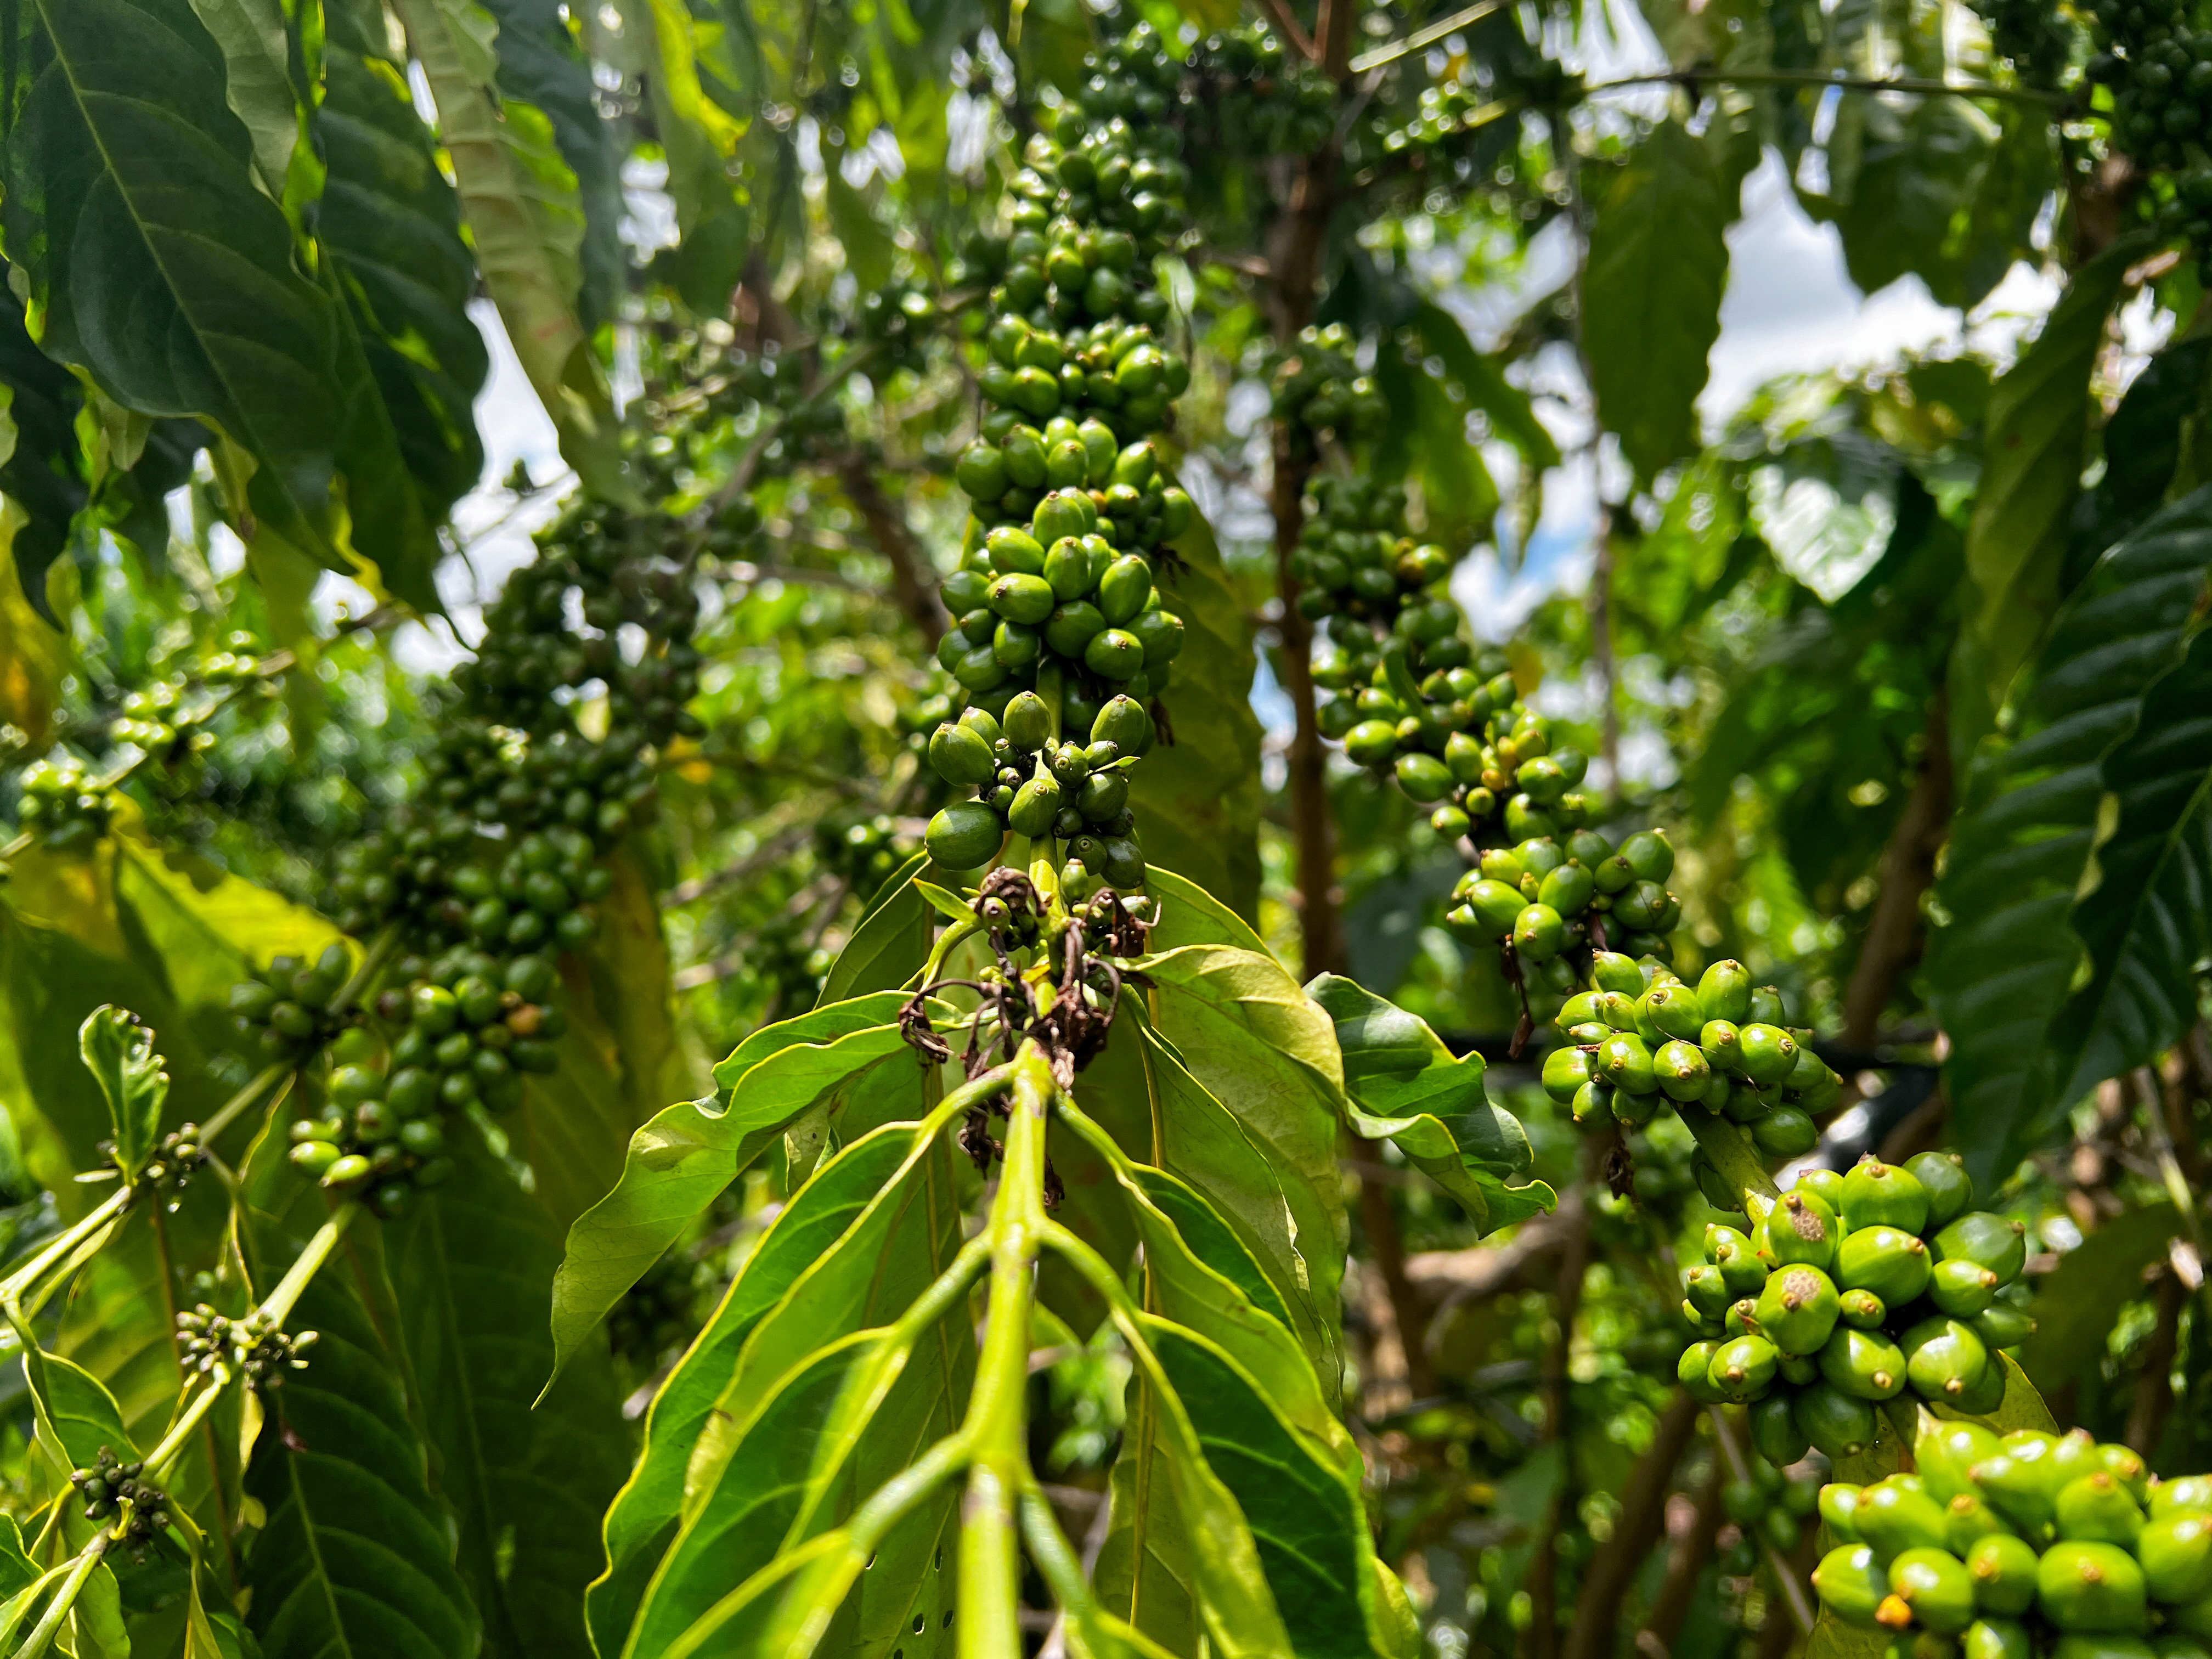 Coffee cherries are pictured at Tran Thi Huong's farm in Pleiku